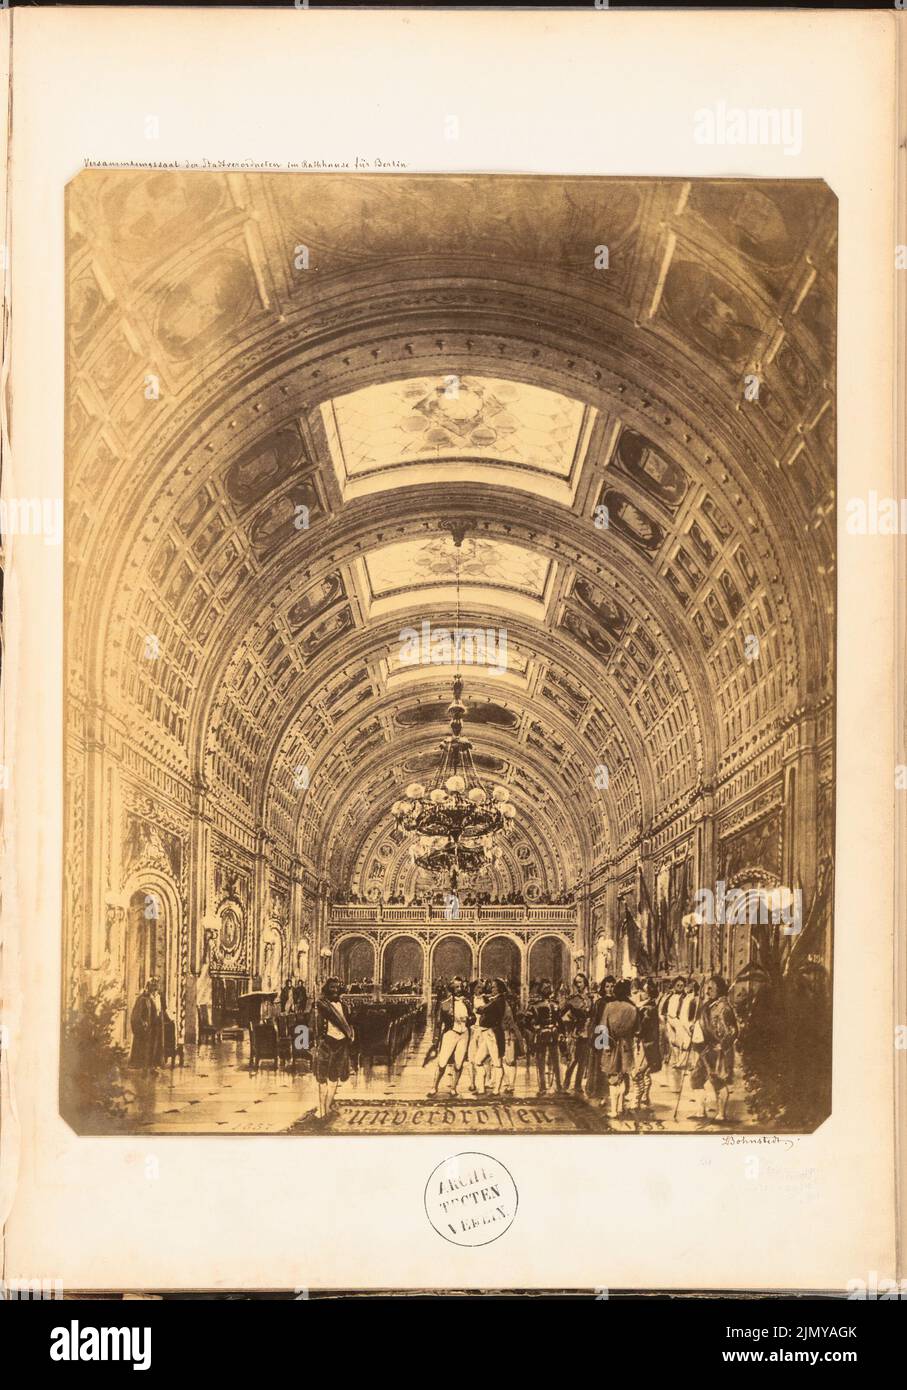 Bohnstedt Ludwig Franz Karl (1822-1885), town hall for Berlin. (From: Competitive designs. Photographs by Bohnstedt's designs, 1857-1864.) (1857-1864): Perspective interior view Assembly hall of the city council. Photo on paper, 45.8 x 31.9 cm (including scan edges) Stock Photo